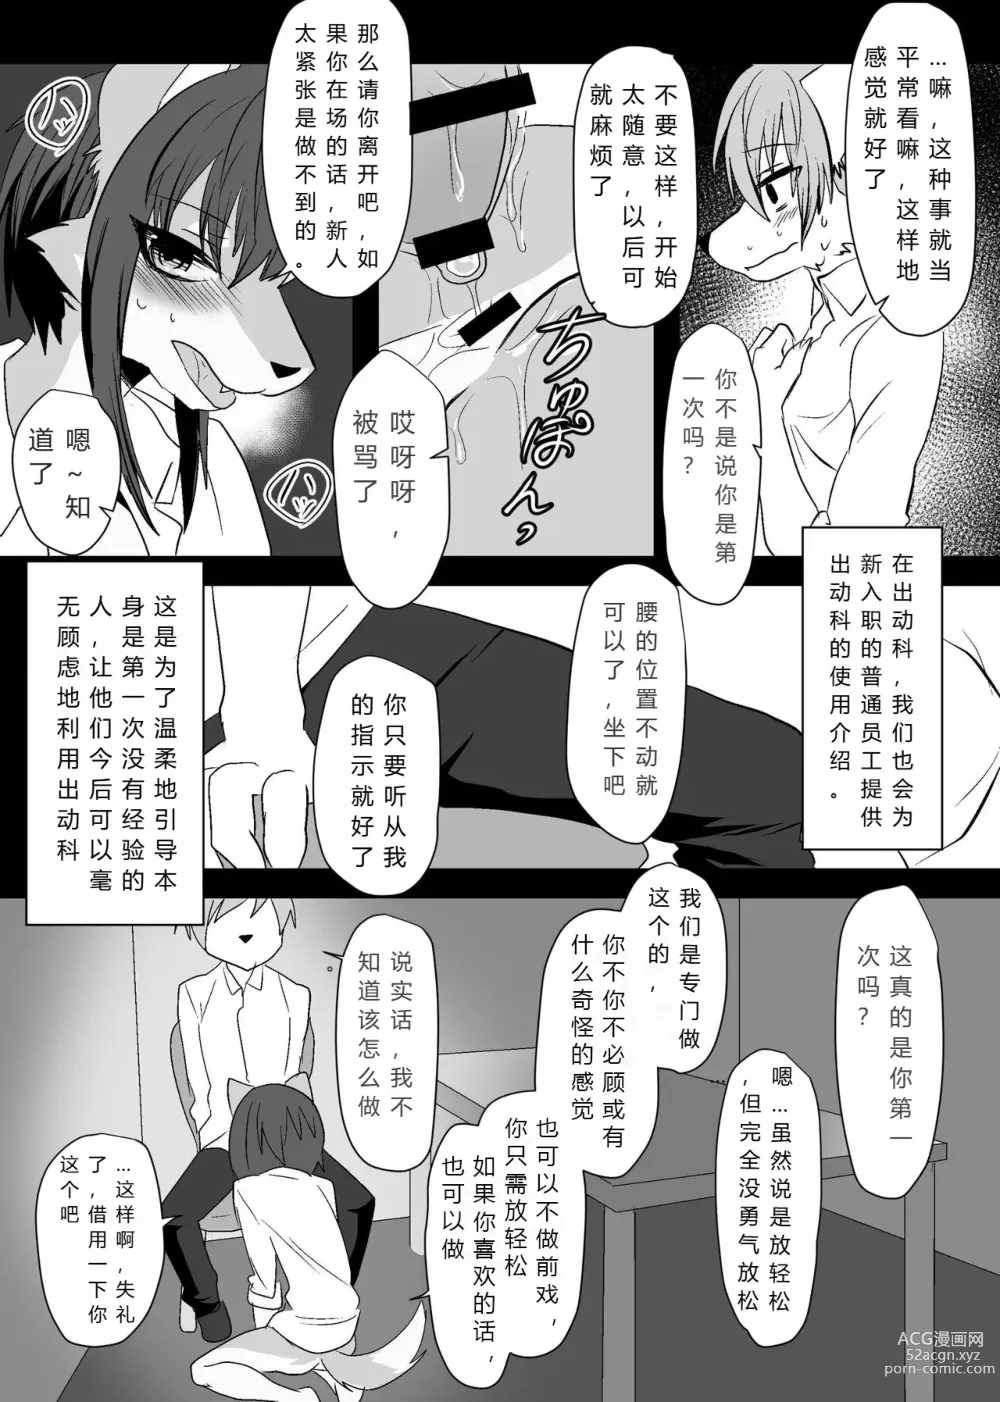 Page 7 of doujinshi 我们要上班吗？